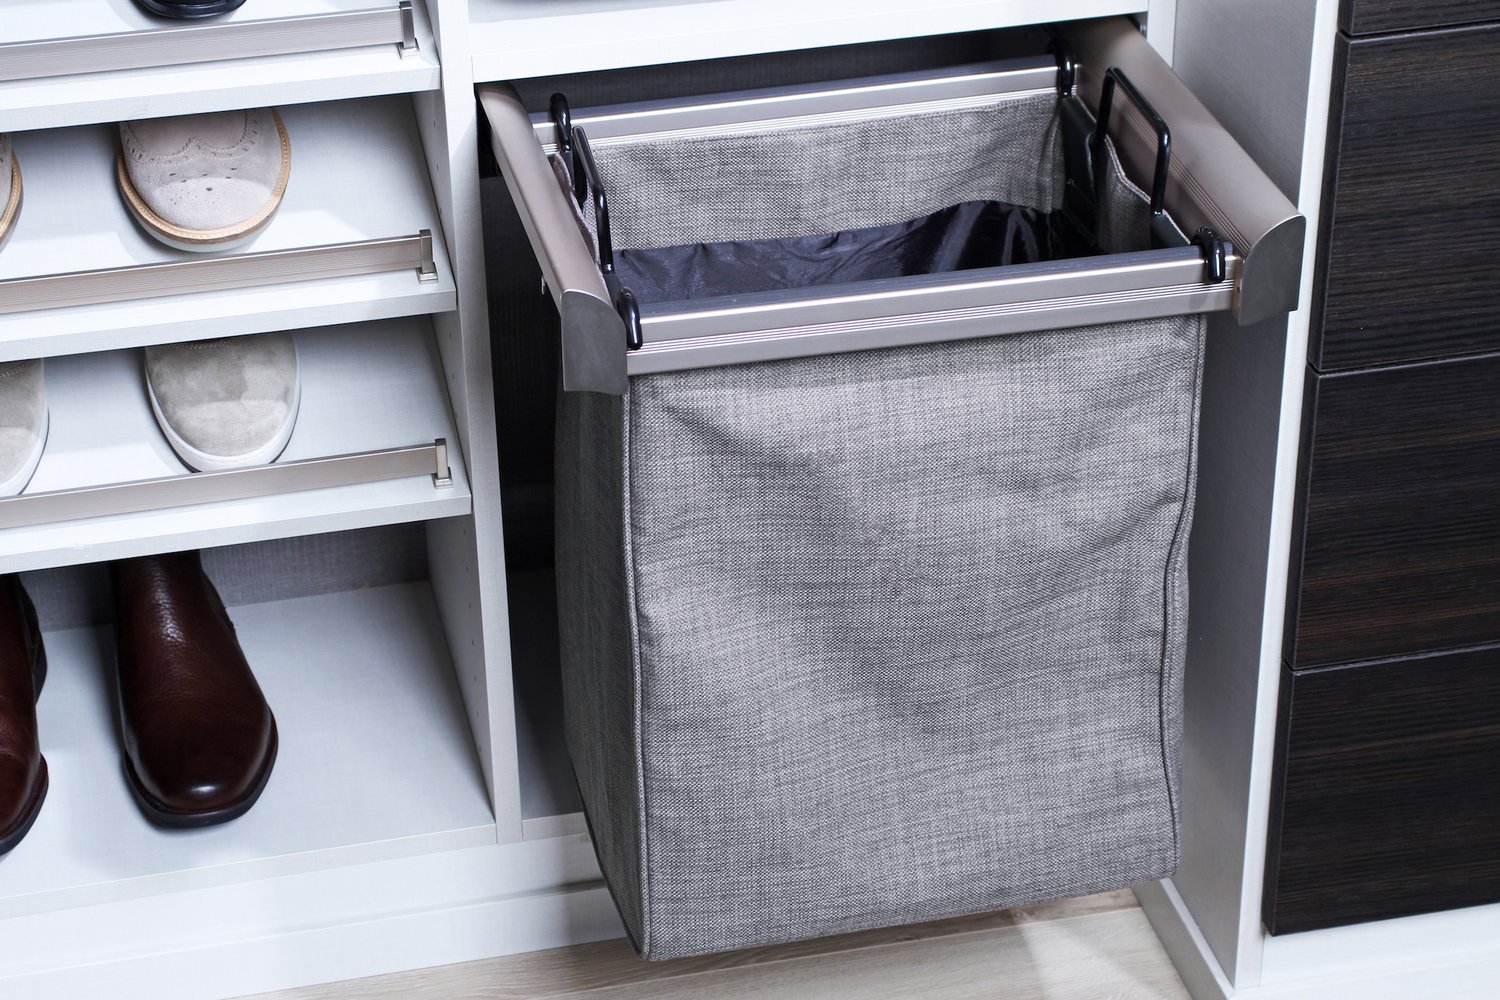 Engage Pull-Out Shoe Organizer with Full Extension Slides by